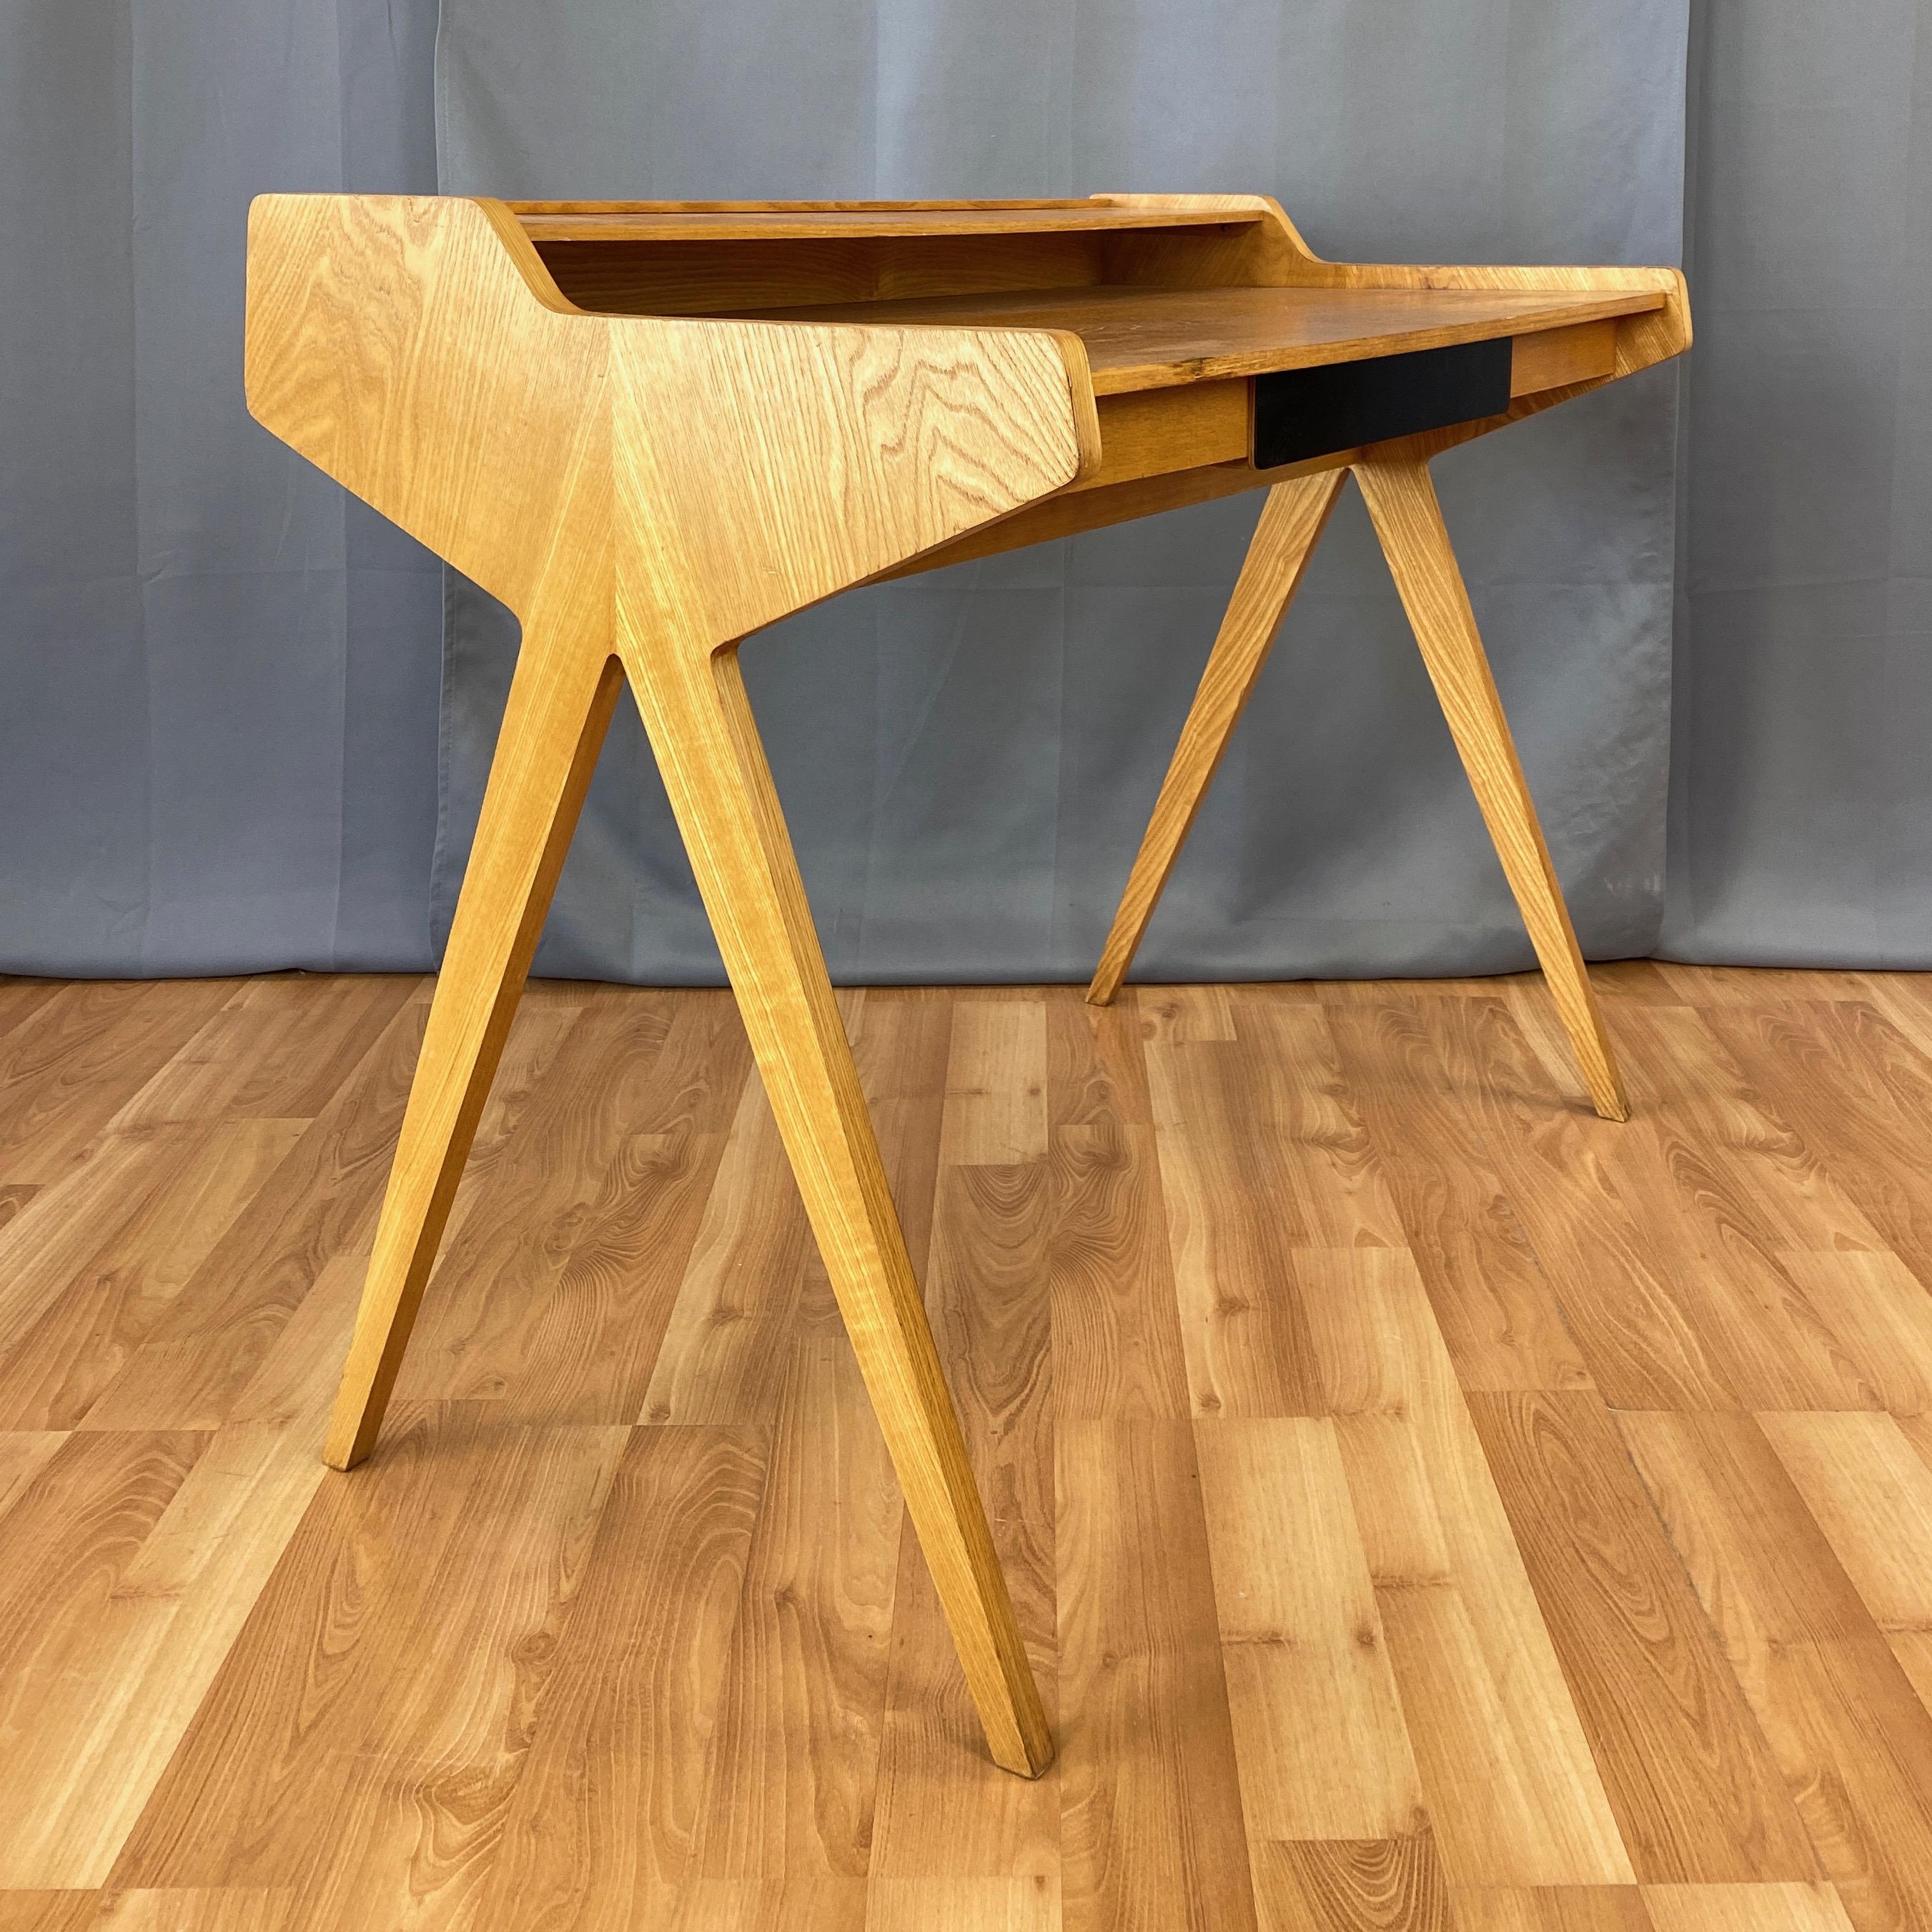 Veneer Helmut Magg for WK Möbel Elm Compass Leg Desk with Drawer and Cubby, 1950s